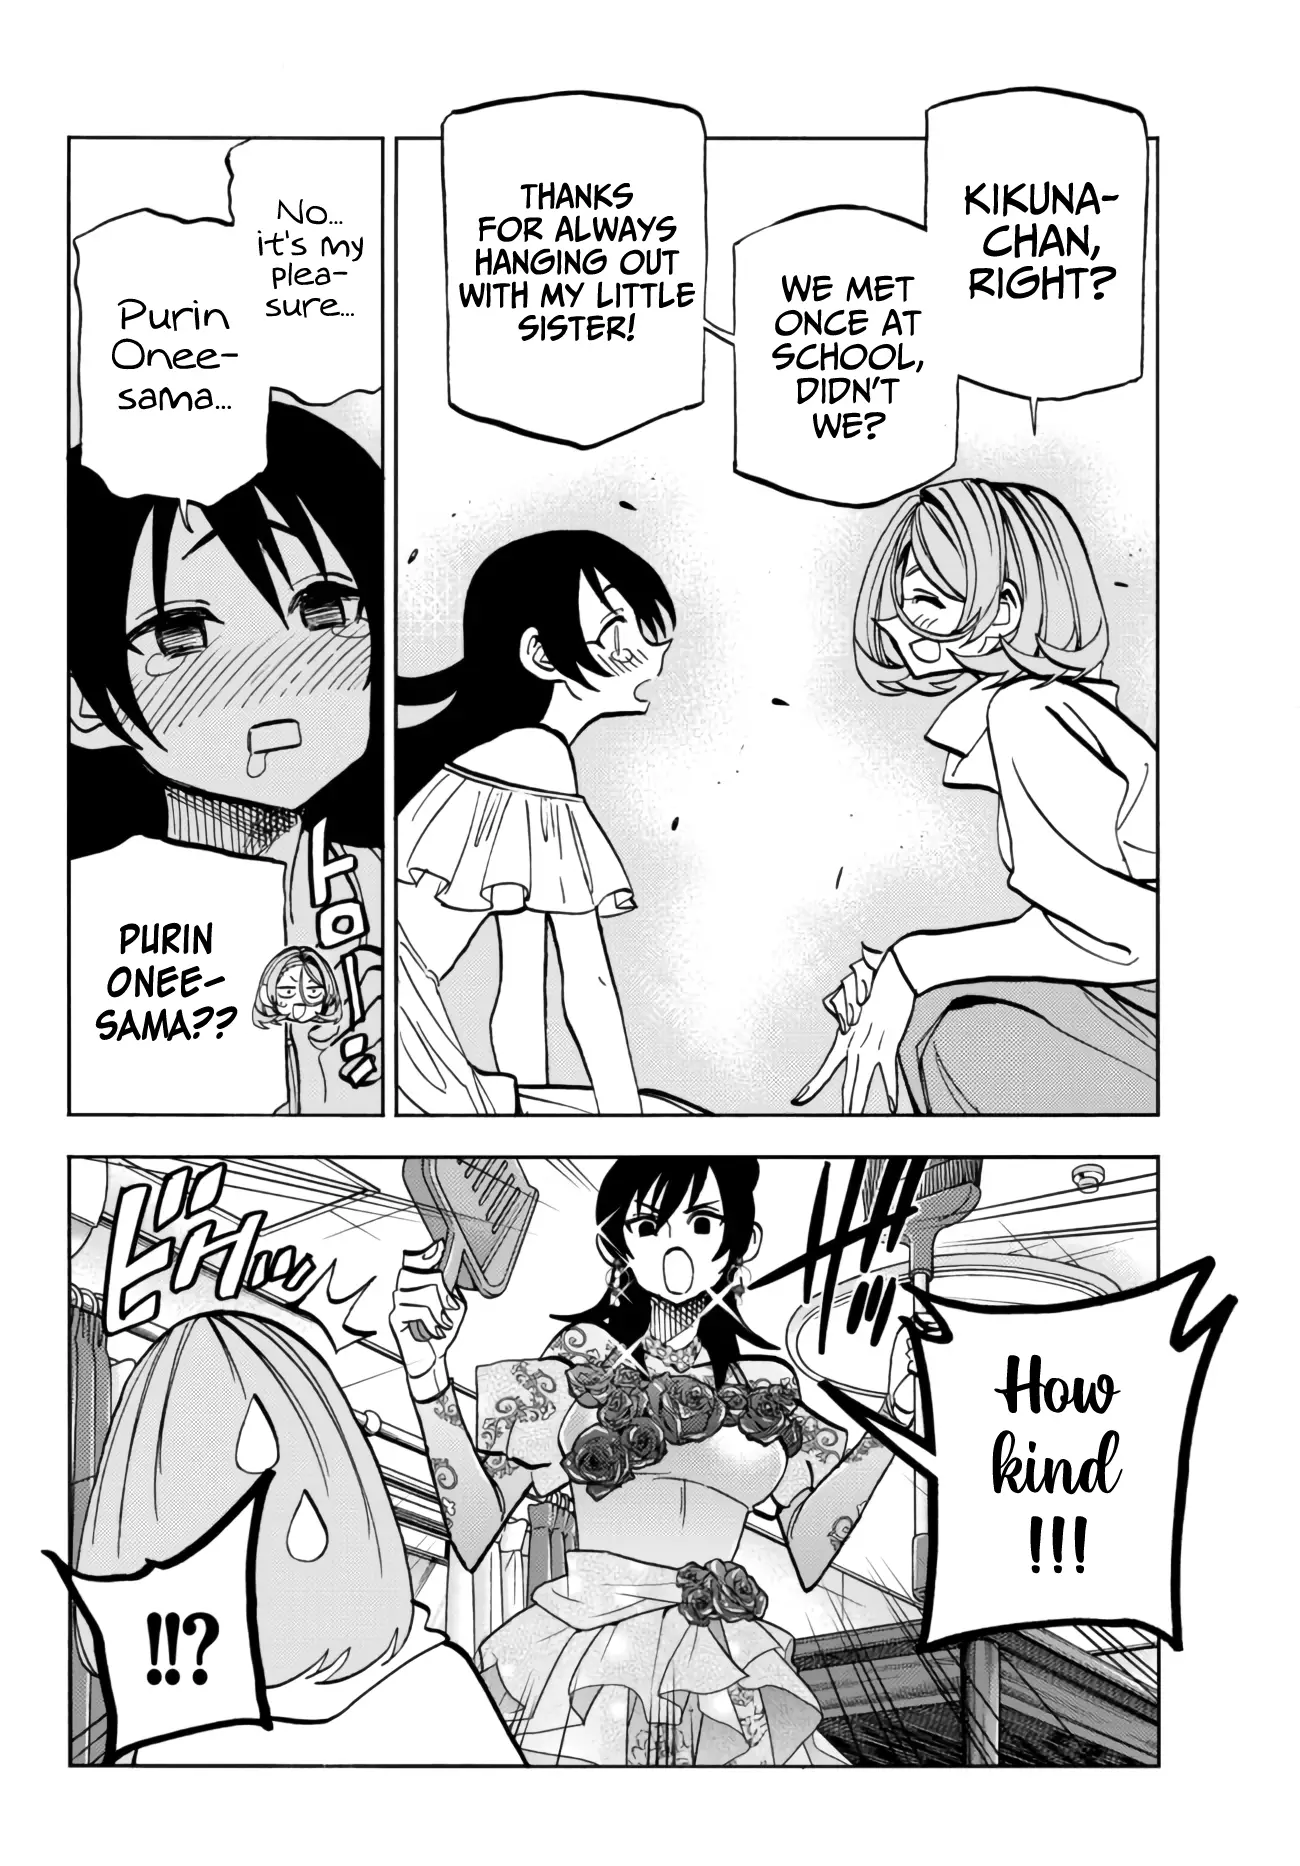 The Story Between A Dumb Prefect And A High School Girl With An Inappropriate Skirt Length - 40 page 10-72e5c0db